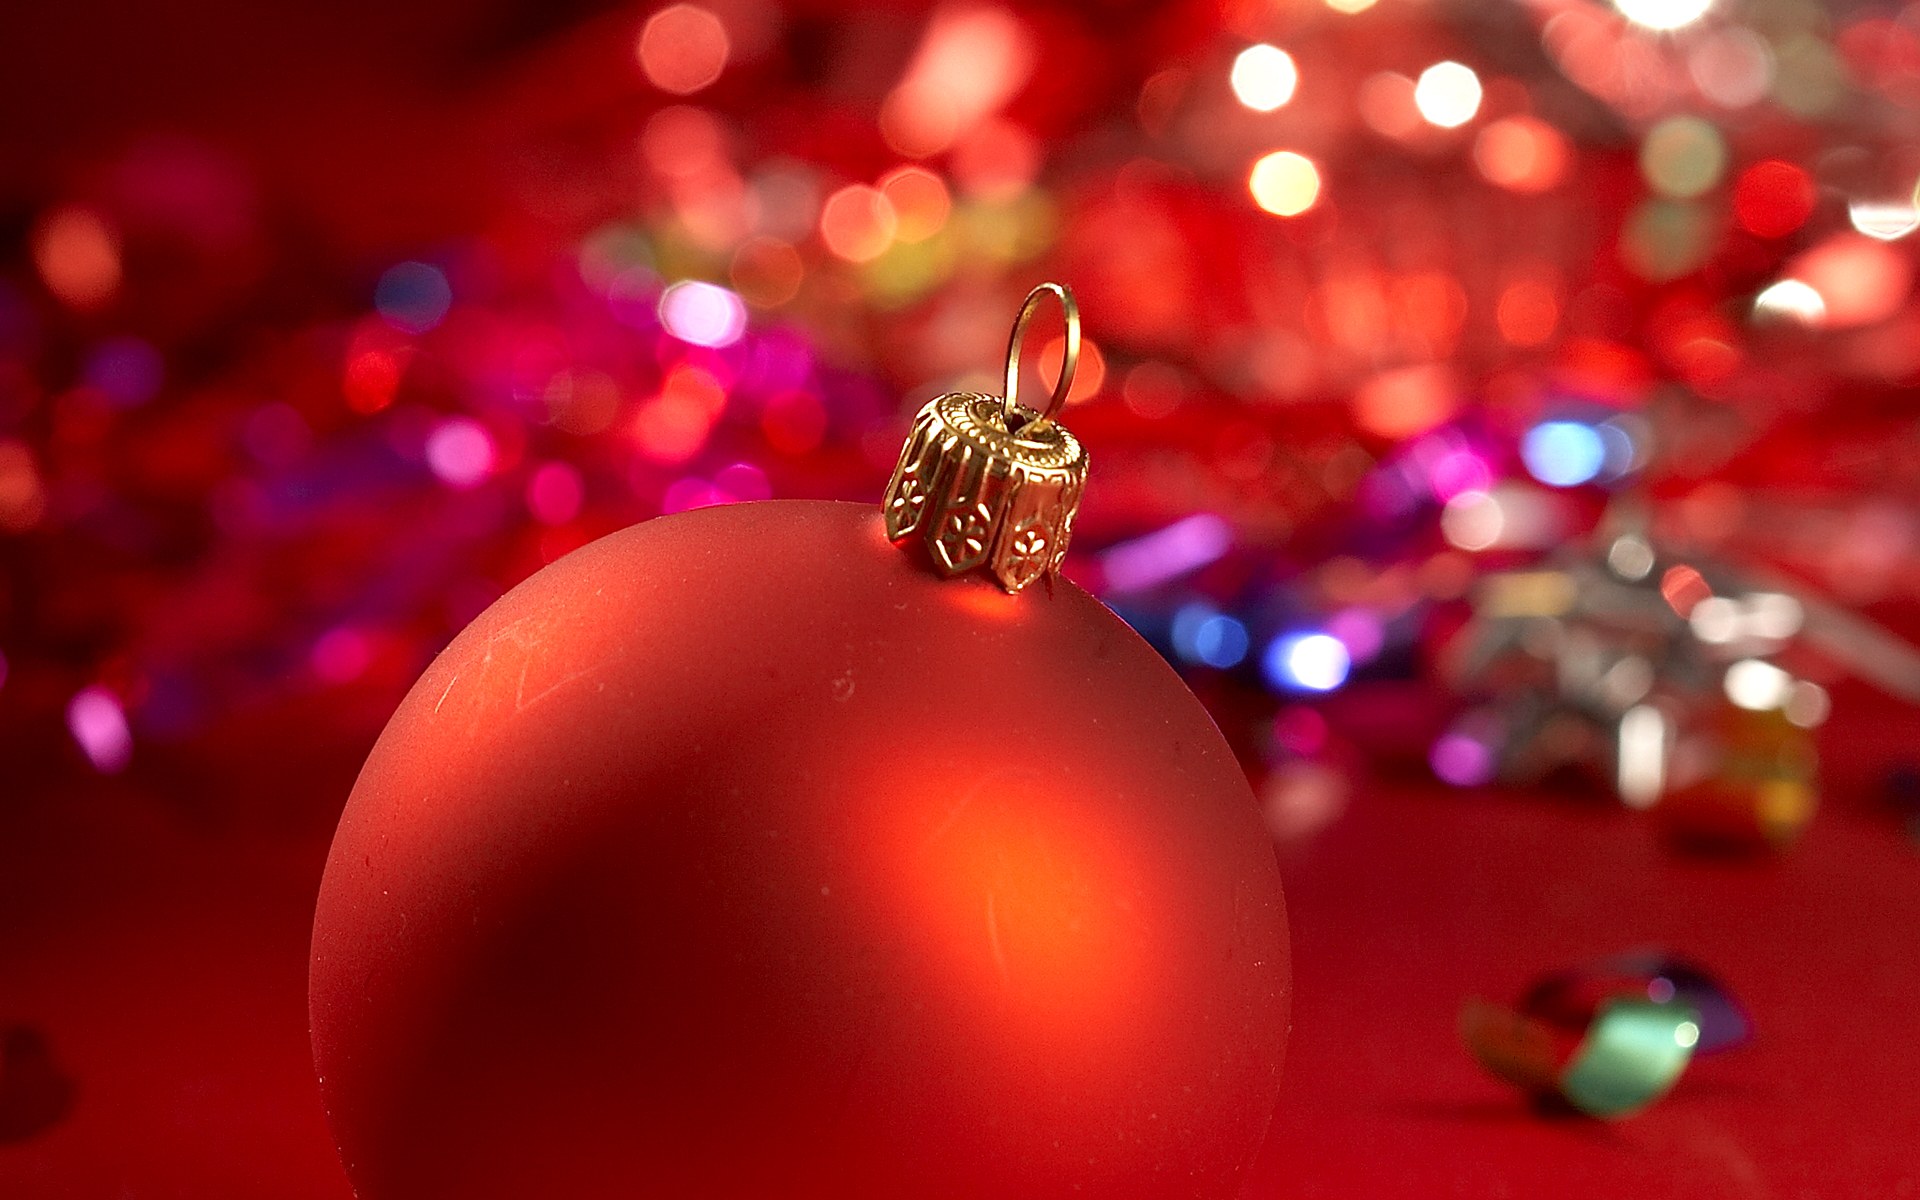 Christmas ornaments on a holiday-themed desktop wallpaper.